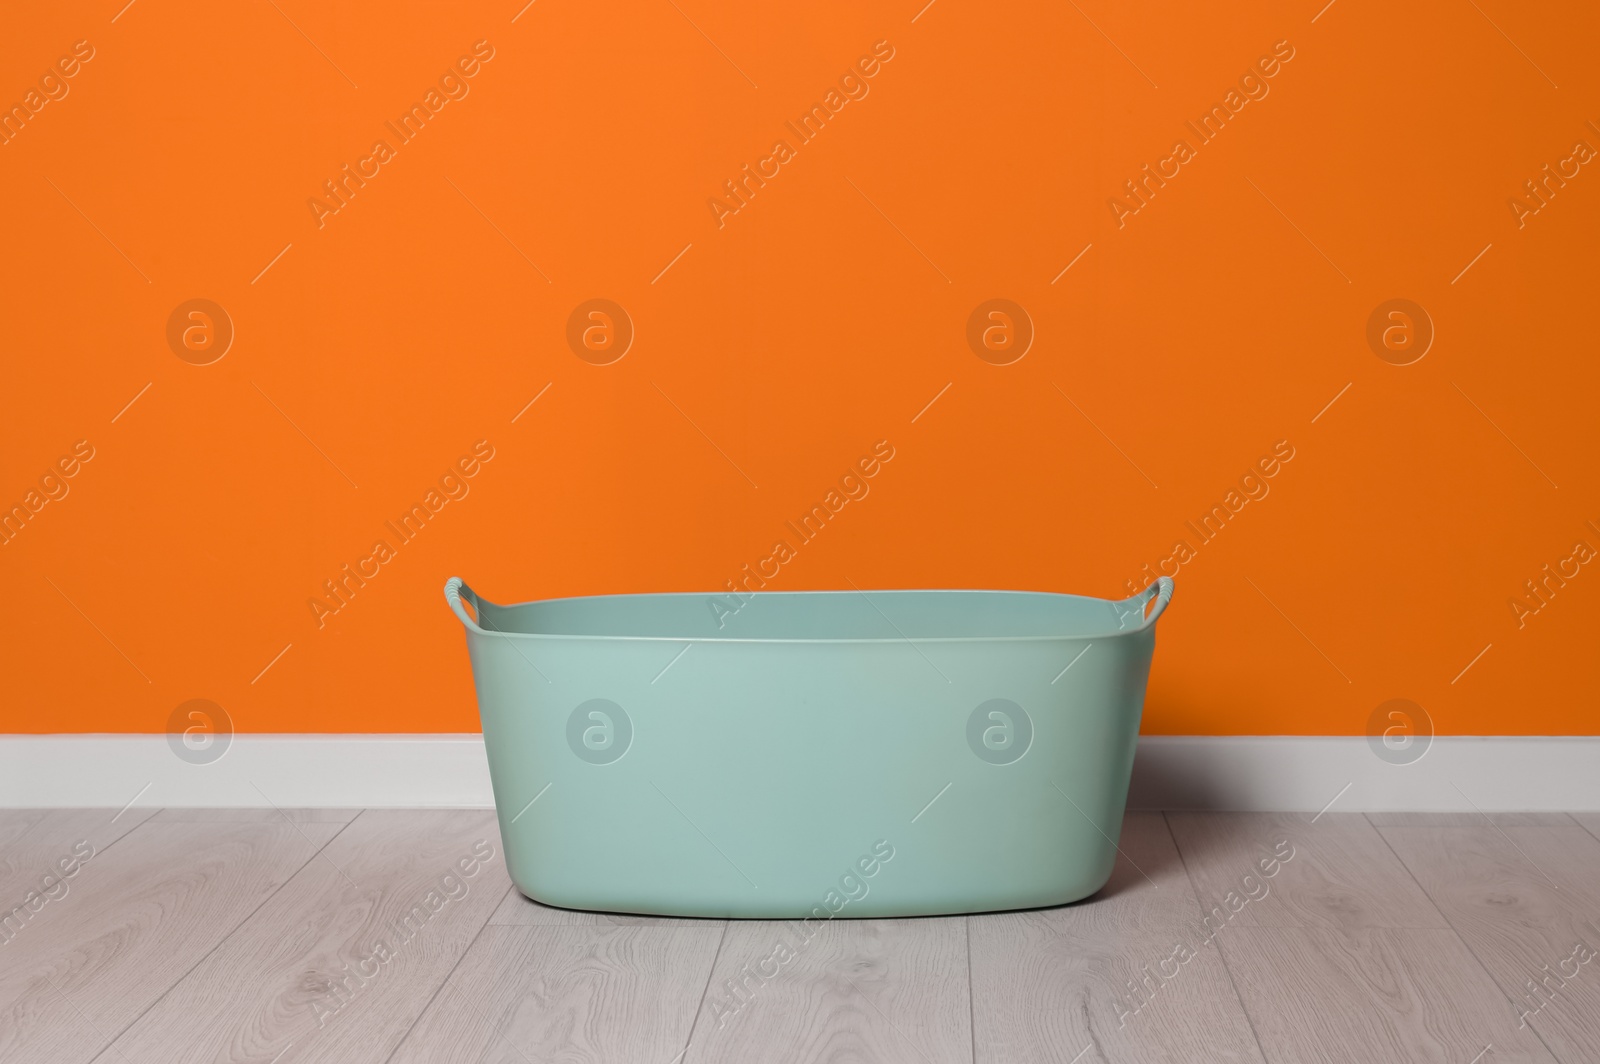 Photo of Laundry basket with handles near orange wall indoors, space for text